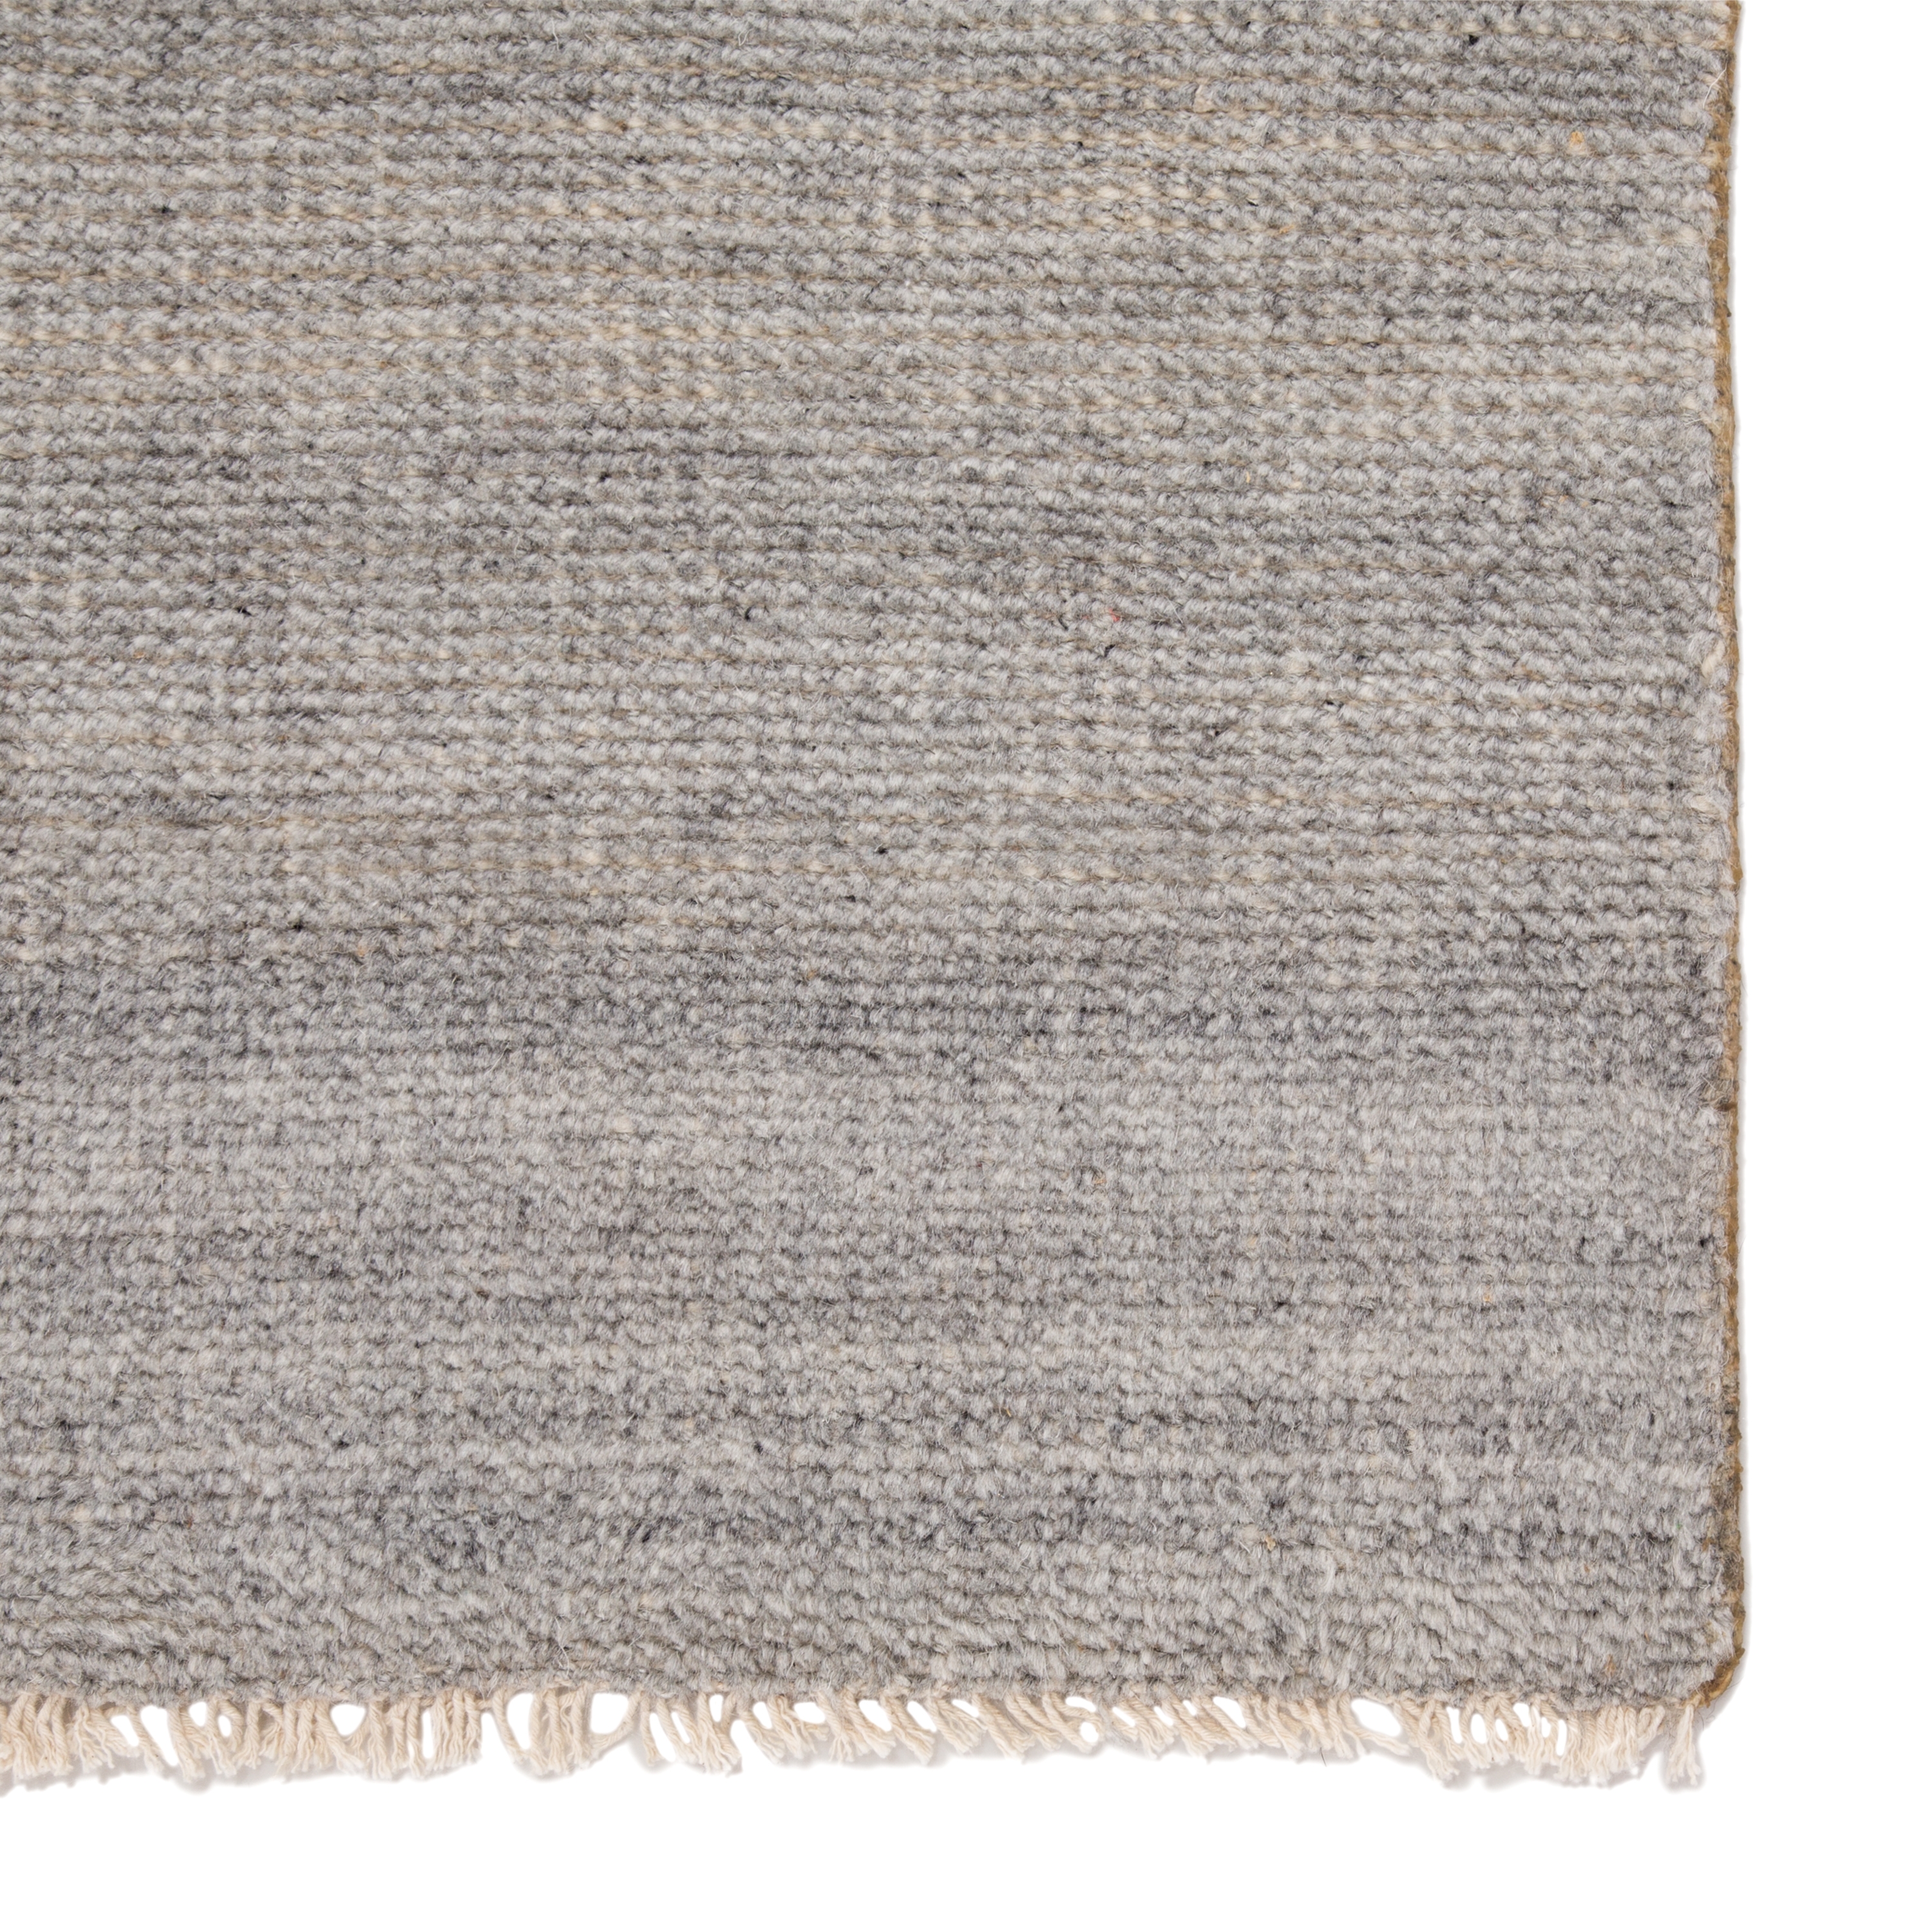 Origin Hand-Knotted Solid Light Gray Area Rug (10'X14') - Image 3